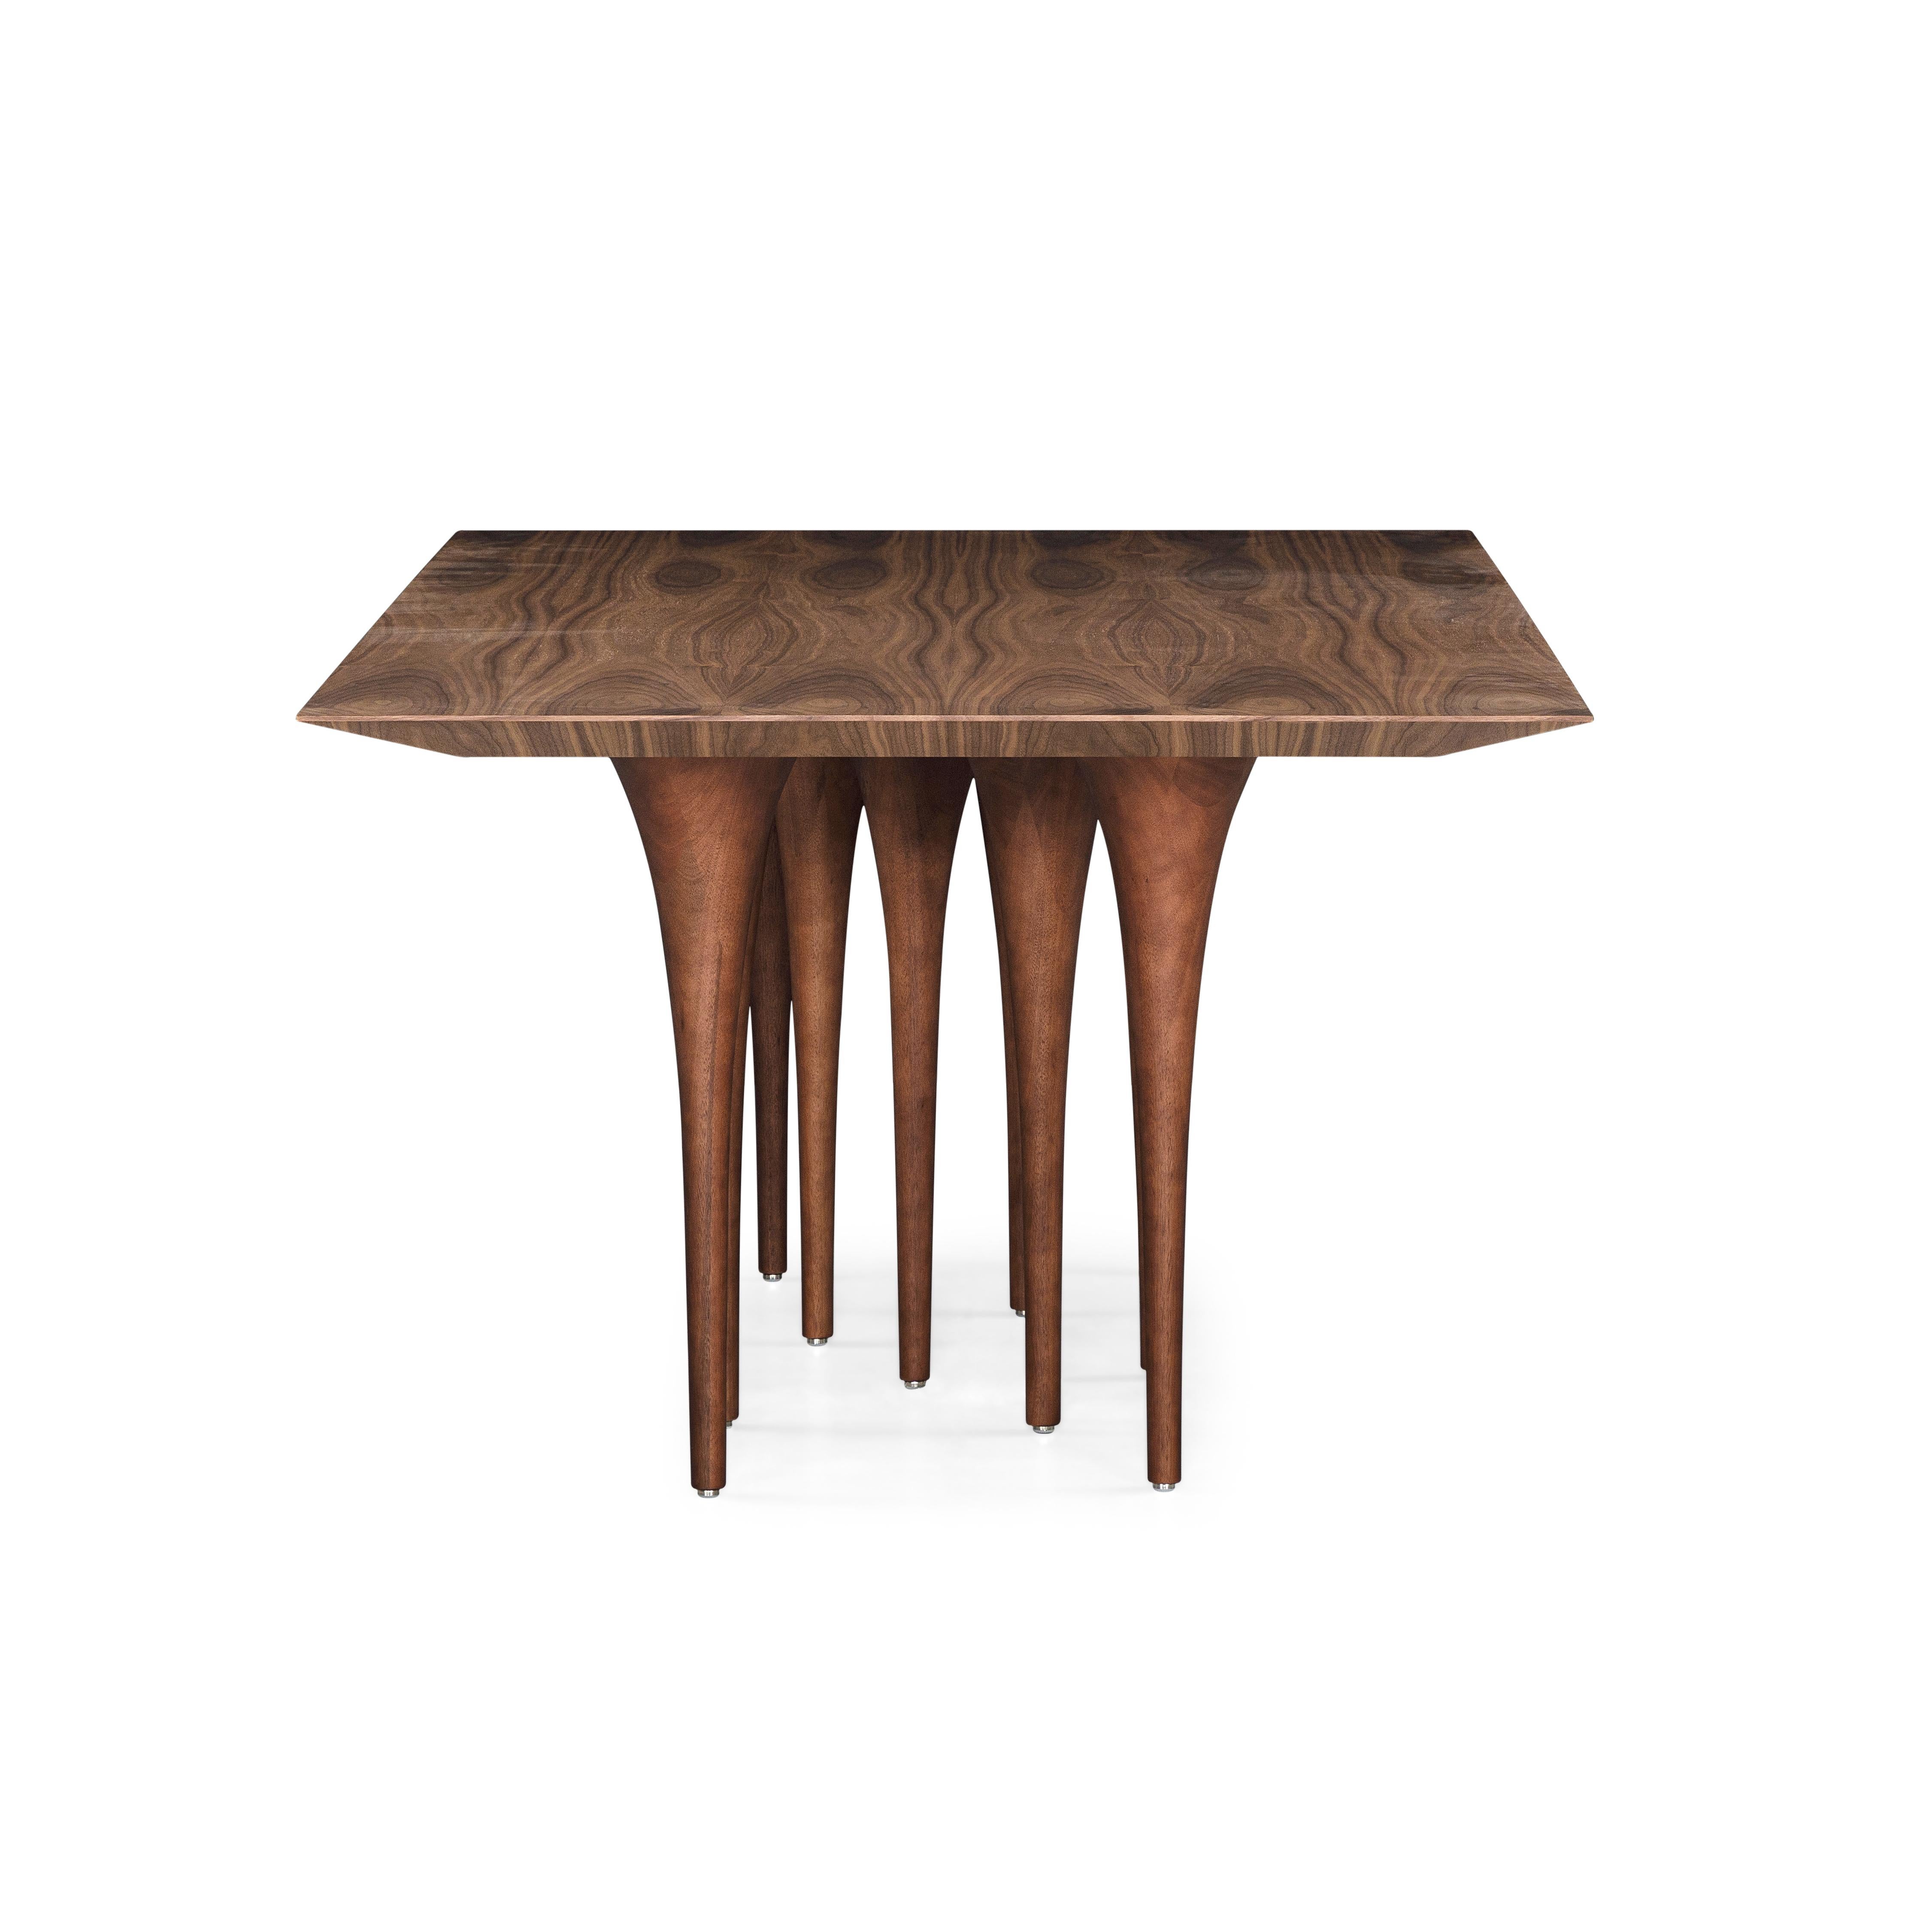 The Uultis team has created this rectangular Pin table in a walnut wood finish with ten legs causing a surprising impact at first sight. It has a very singular and original structure resembling the corridors of Gothic castles, but at the same time,